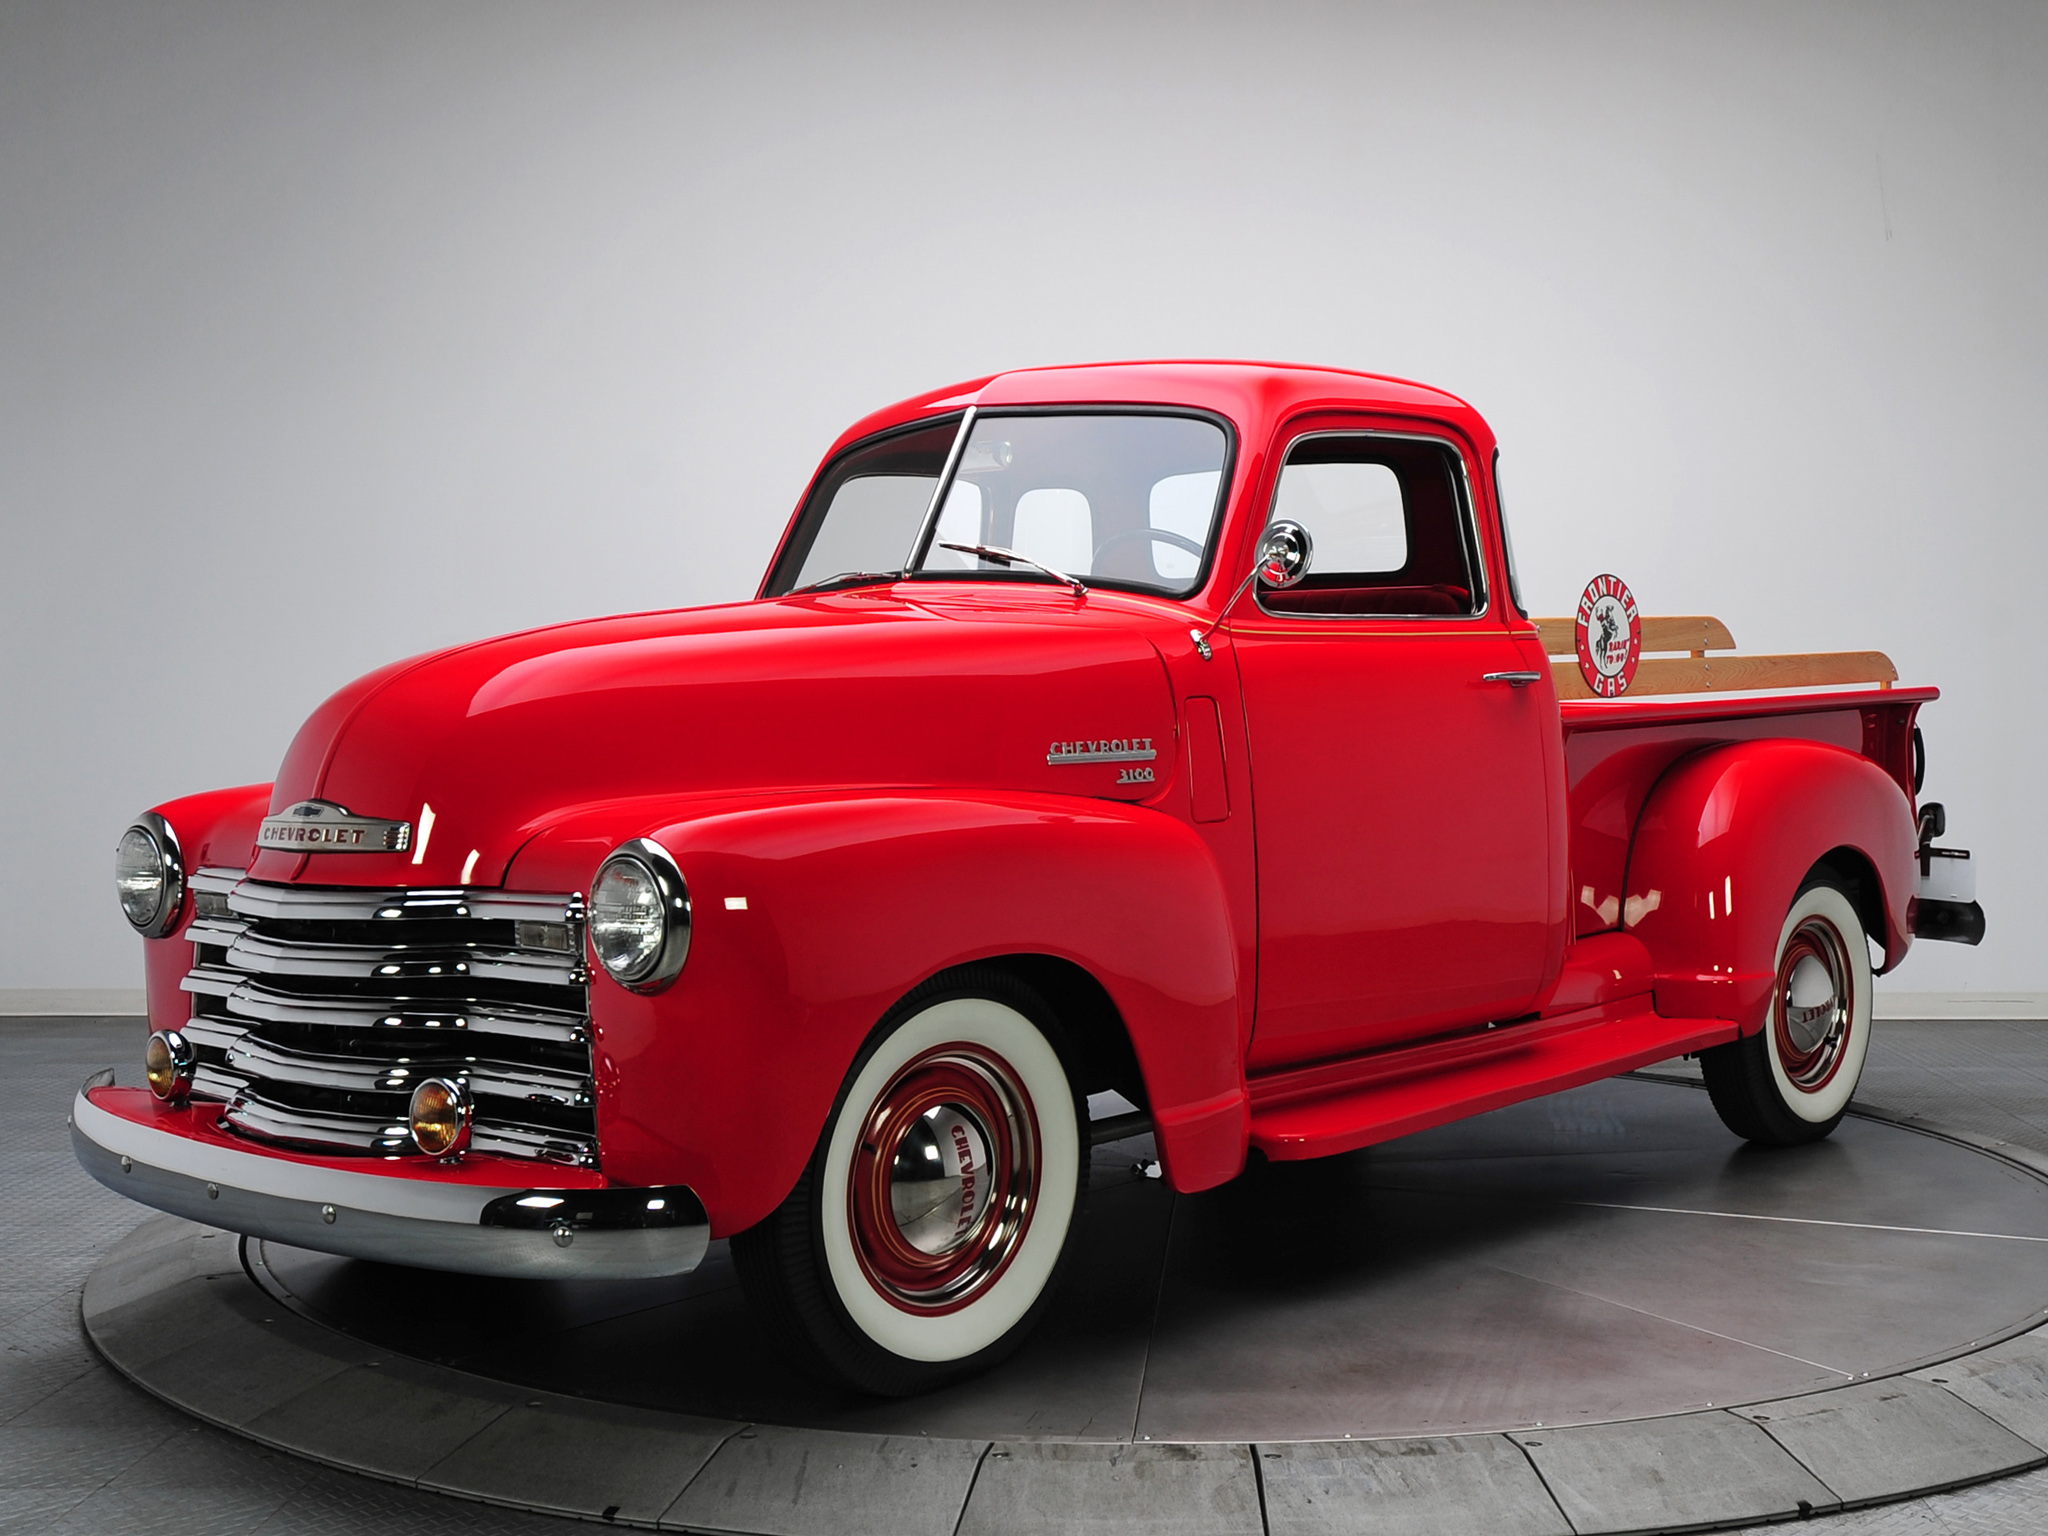  download chevy pickup Chevrolet Wallpapers Chevrolet 3100 2048x1536